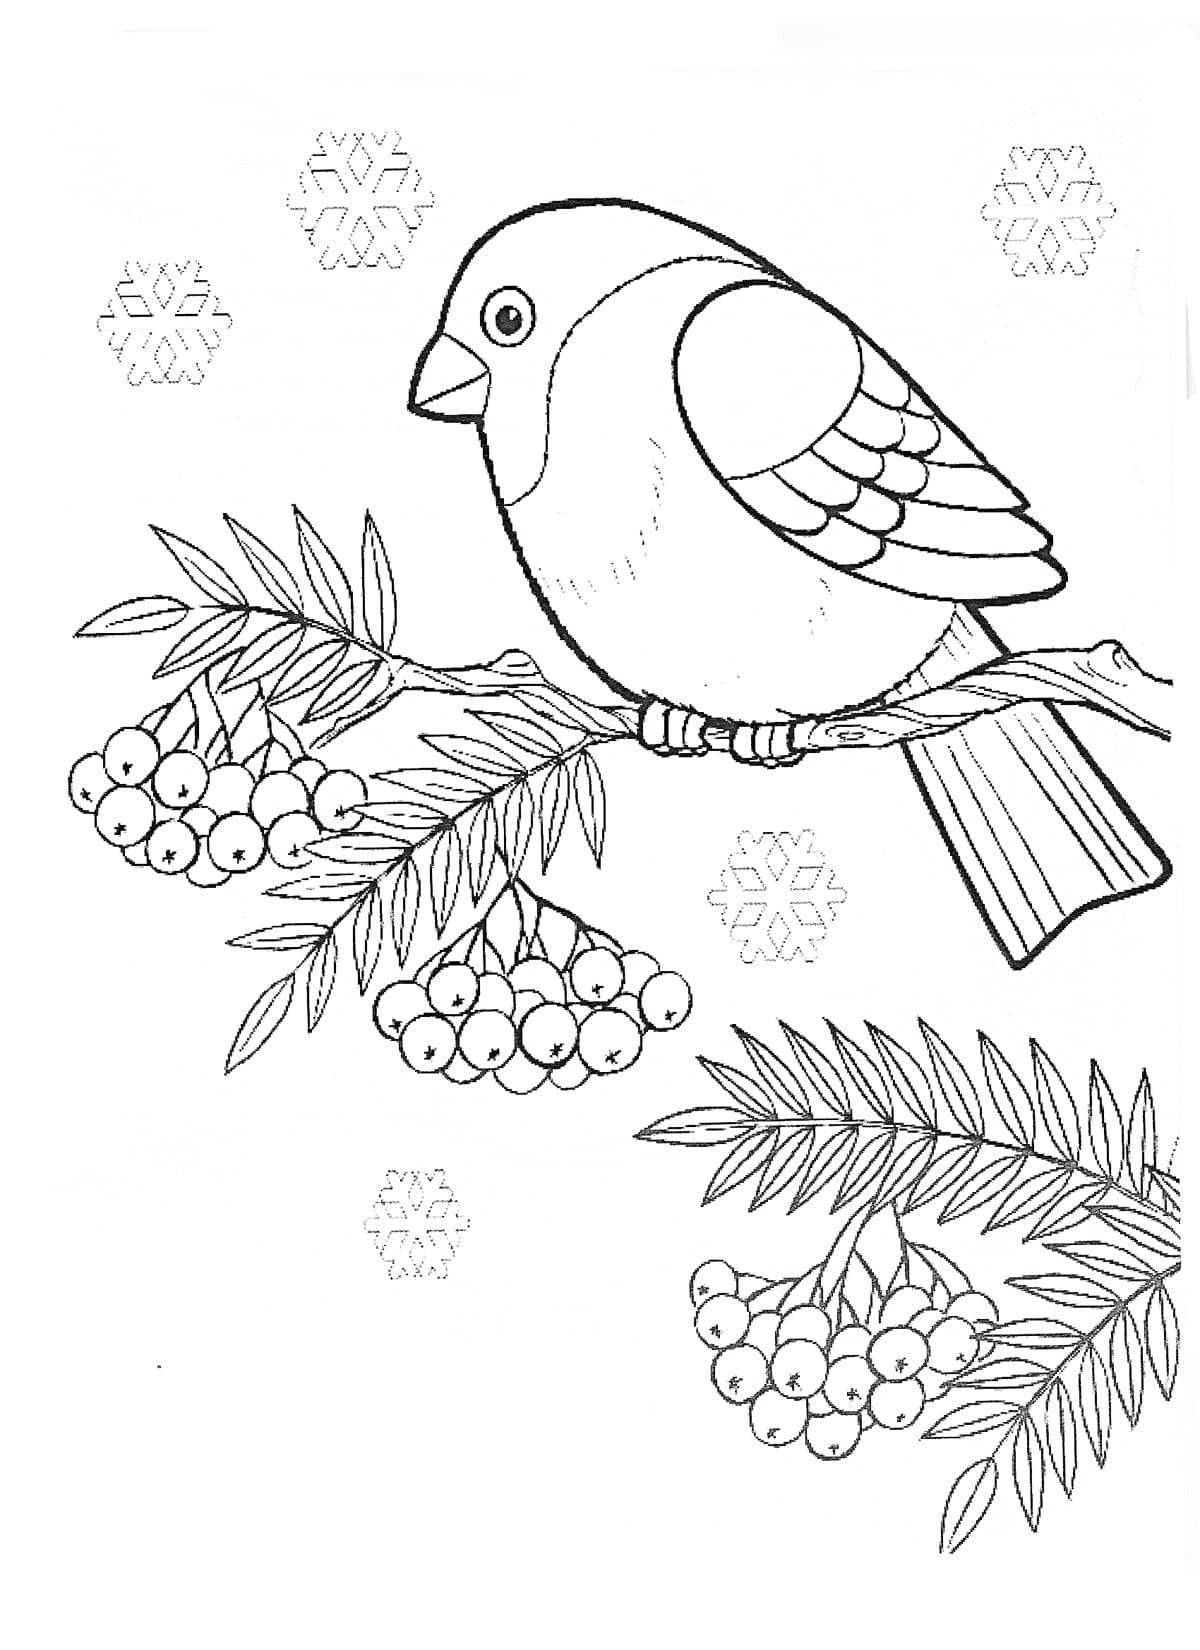 Amazing bullfinch coloring book for kids 4-5 years old